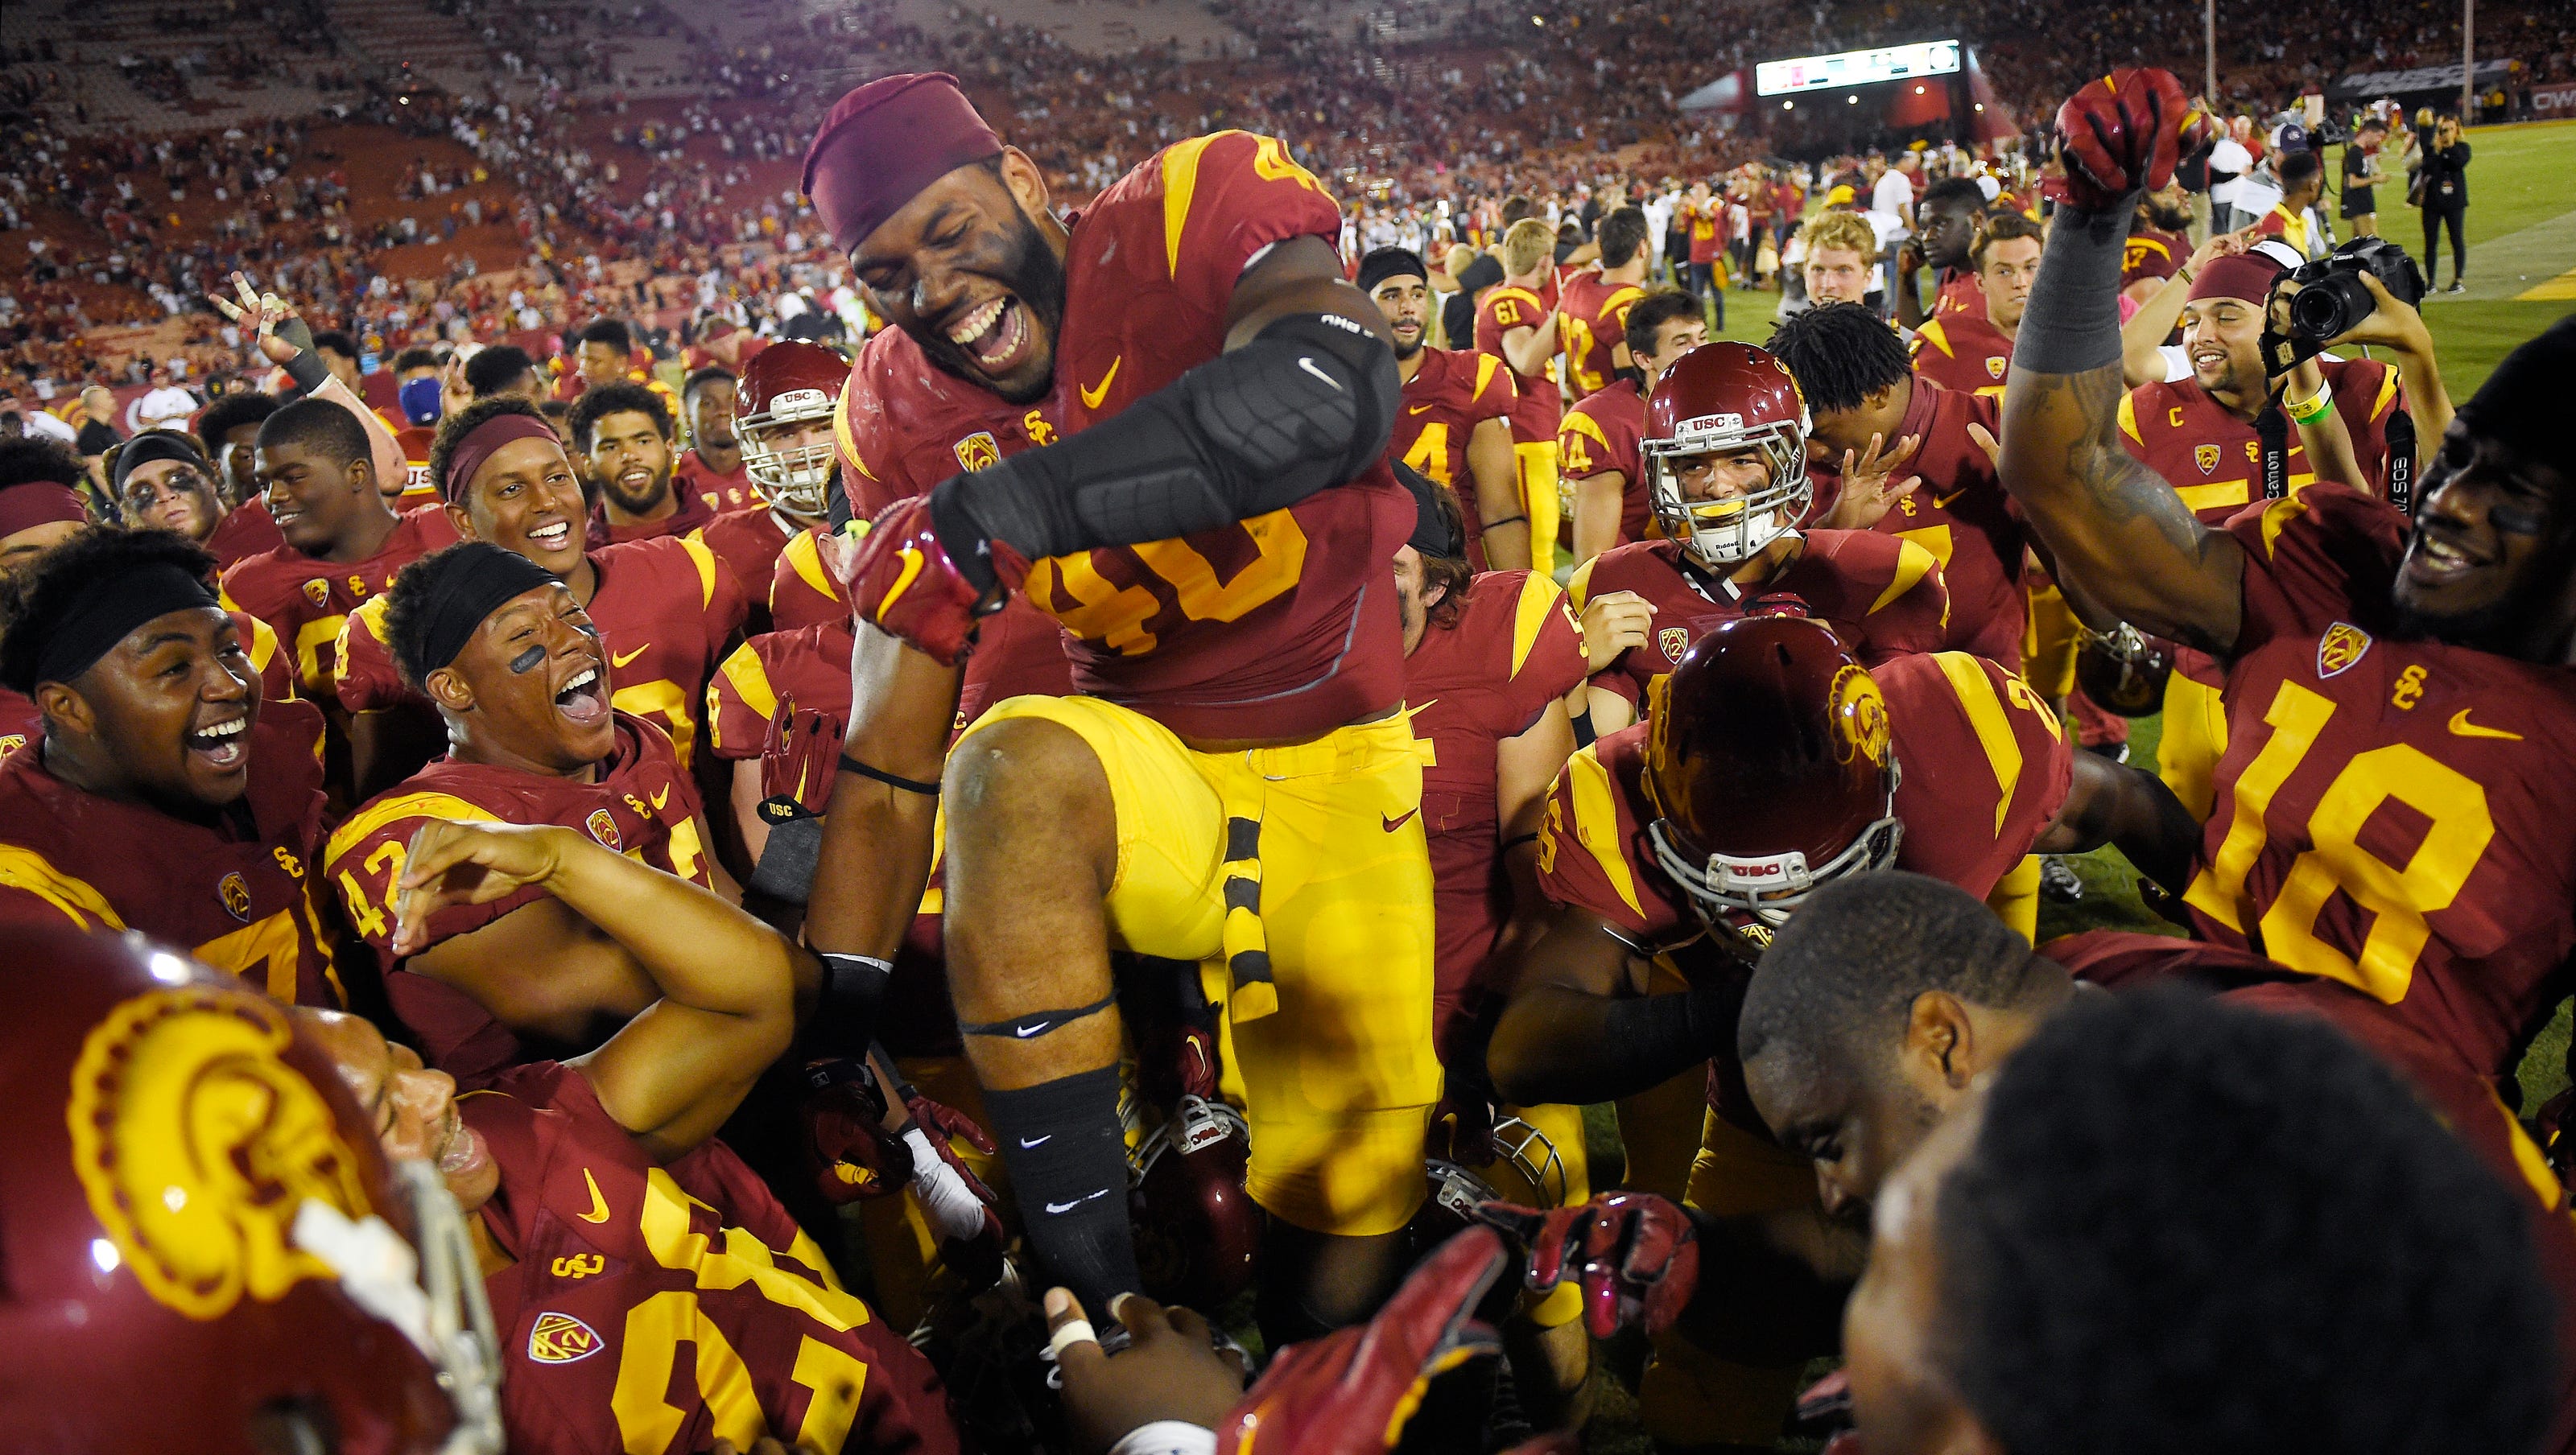 USC, UCLA to join Big Ten in 2024, creating 16team conference